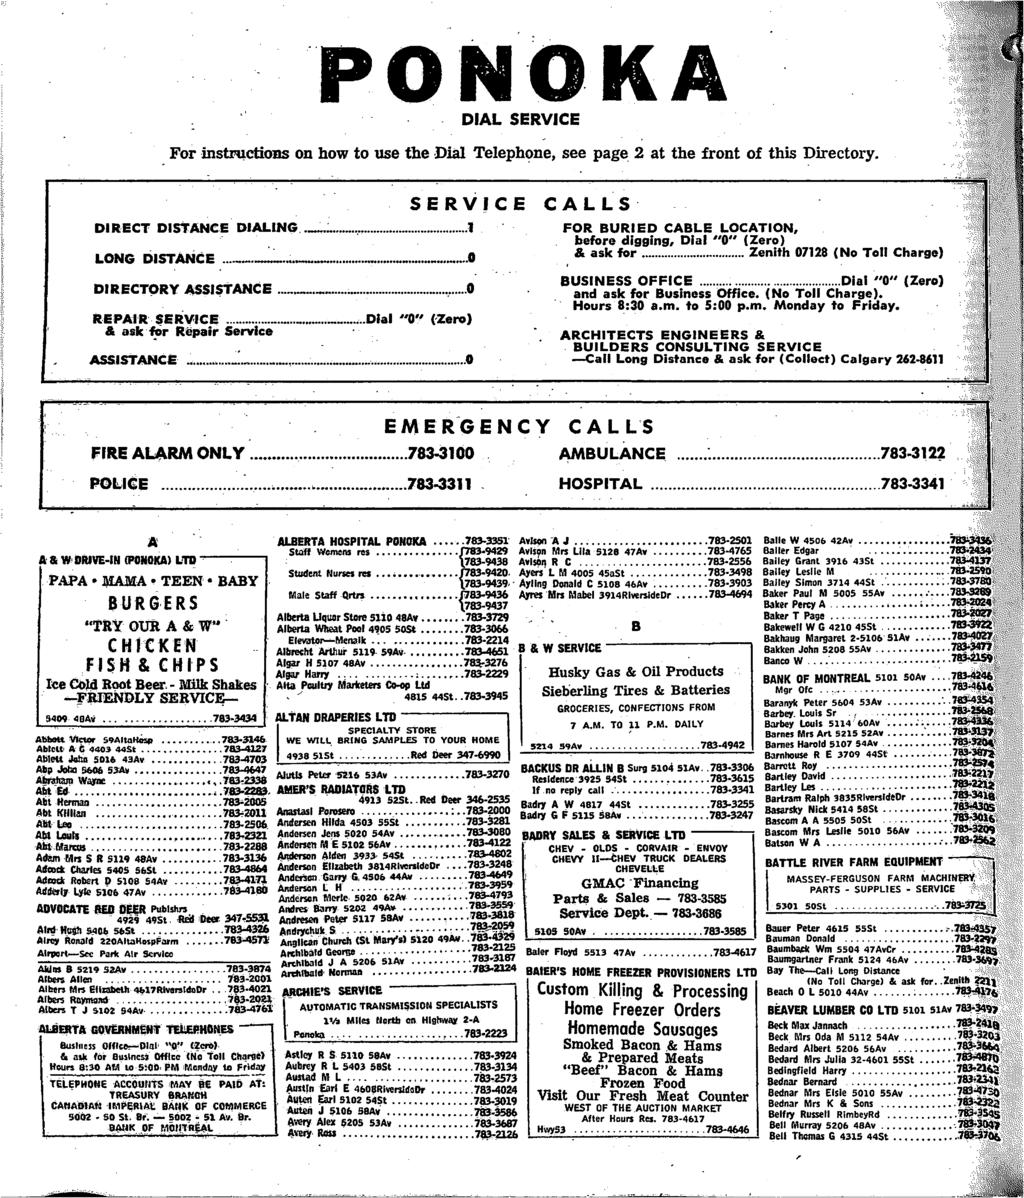 PONOKA DIAL SERVICE For instructions on how to use the Dial Telephone, see page 2 at the front of this Directory. SERVICE CALLS DIRECT DISTANCE DIALING 1 LONG DISTANCE.